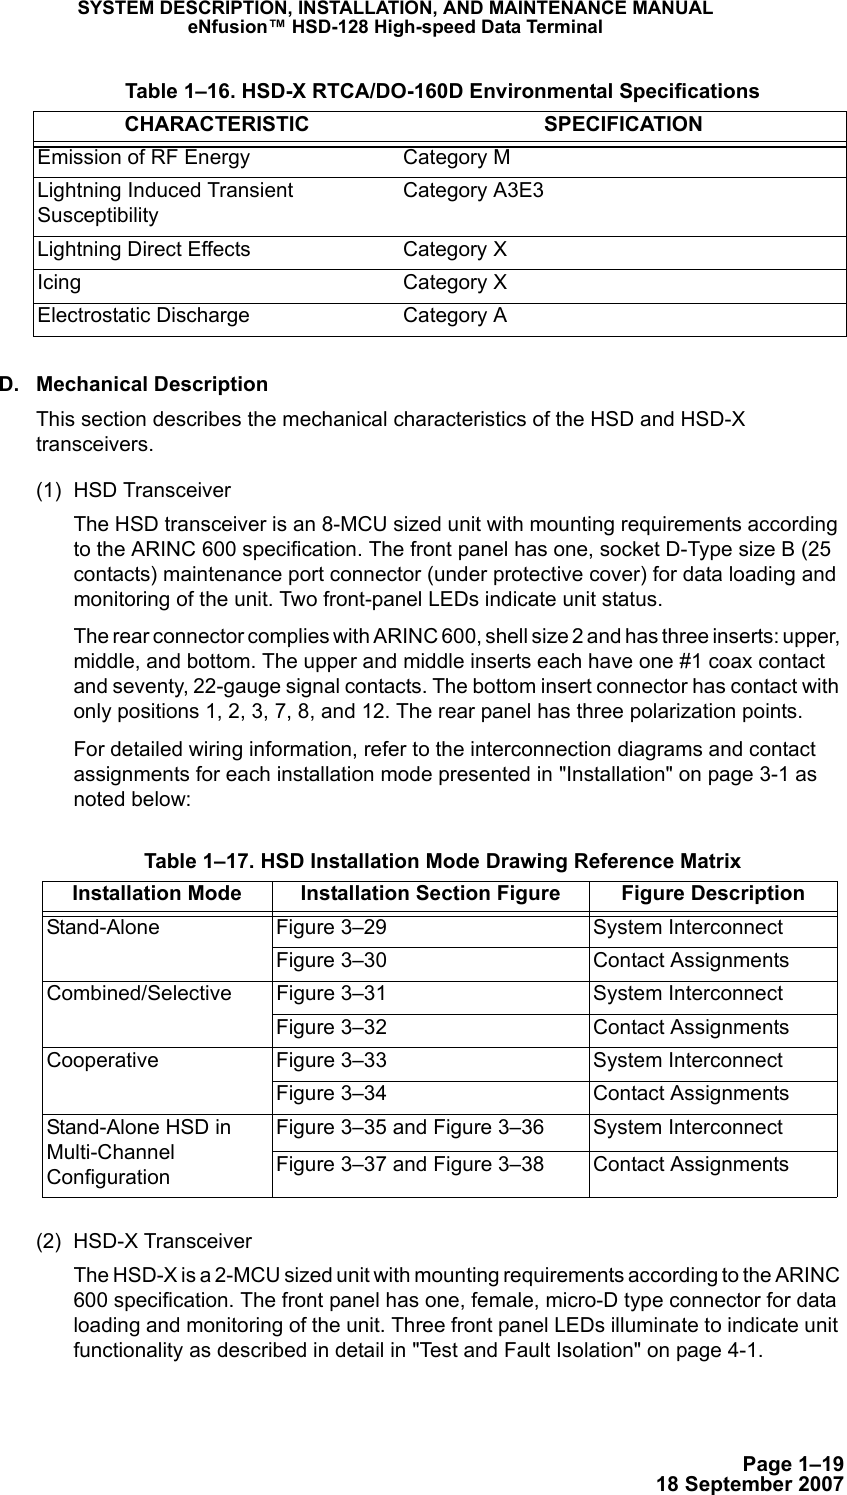 Page 1–1918 September 2007SYSTEM DESCRIPTION, INSTALLATION, AND MAINTENANCE MANUALeNfusion™ HSD-128 High-speed Data TerminalD. Mechanical DescriptionThis section describes the mechanical characteristics of the HSD and HSD-X transceivers.(1) HSD Transceiver The HSD transceiver is an 8-MCU sized unit with mounting requirements according to the ARINC 600 specification. The front panel has one, socket D-Type size B (25 contacts) maintenance port connector (under protective cover) for data loading and monitoring of the unit. Two front-panel LEDs indicate unit status. The rear connector complies with ARINC 600, shell size 2 and has three inserts: upper, middle, and bottom. The upper and middle inserts each have one #1 coax contact and seventy, 22-gauge signal contacts. The bottom insert connector has contact with only positions 1, 2, 3, 7, 8, and 12. The rear panel has three polarization points. For detailed wiring information, refer to the interconnection diagrams and contact assignments for each installation mode presented in &quot;Installation&quot; on page 3-1 as noted below:(2) HSD-X TransceiverThe HSD-X is a 2-MCU sized unit with mounting requirements according to the ARINC 600 specification. The front panel has one, female, micro-D type connector for data loading and monitoring of the unit. Three front panel LEDs illuminate to indicate unit functionality as described in detail in &quot;Test and Fault Isolation&quot; on page 4-1.Emission of RF Energy Category MLightning Induced Transient SusceptibilityCategory A3E3Lightning Direct Effects Category XIcing Category XElectrostatic Discharge Category A Table 1–16. HSD-X RTCA/DO-160D Environmental SpecificationsCHARACTERISTIC SPECIFICATION Table 1–17. HSD Installation Mode Drawing Reference MatrixInstallation Mode Installation Section Figure  Figure DescriptionStand-Alone Figure 3–29 System Interconnect Figure 3–30 Contact AssignmentsCombined/Selective  Figure 3–31 System InterconnectFigure 3–32 Contact AssignmentsCooperative Figure 3–33 System InterconnectFigure 3–34 Contact AssignmentsStand-Alone HSD in Multi-Channel ConfigurationFigure 3–35 and Figure 3–36 System InterconnectFigure 3–37 and Figure 3–38 Contact Assignments